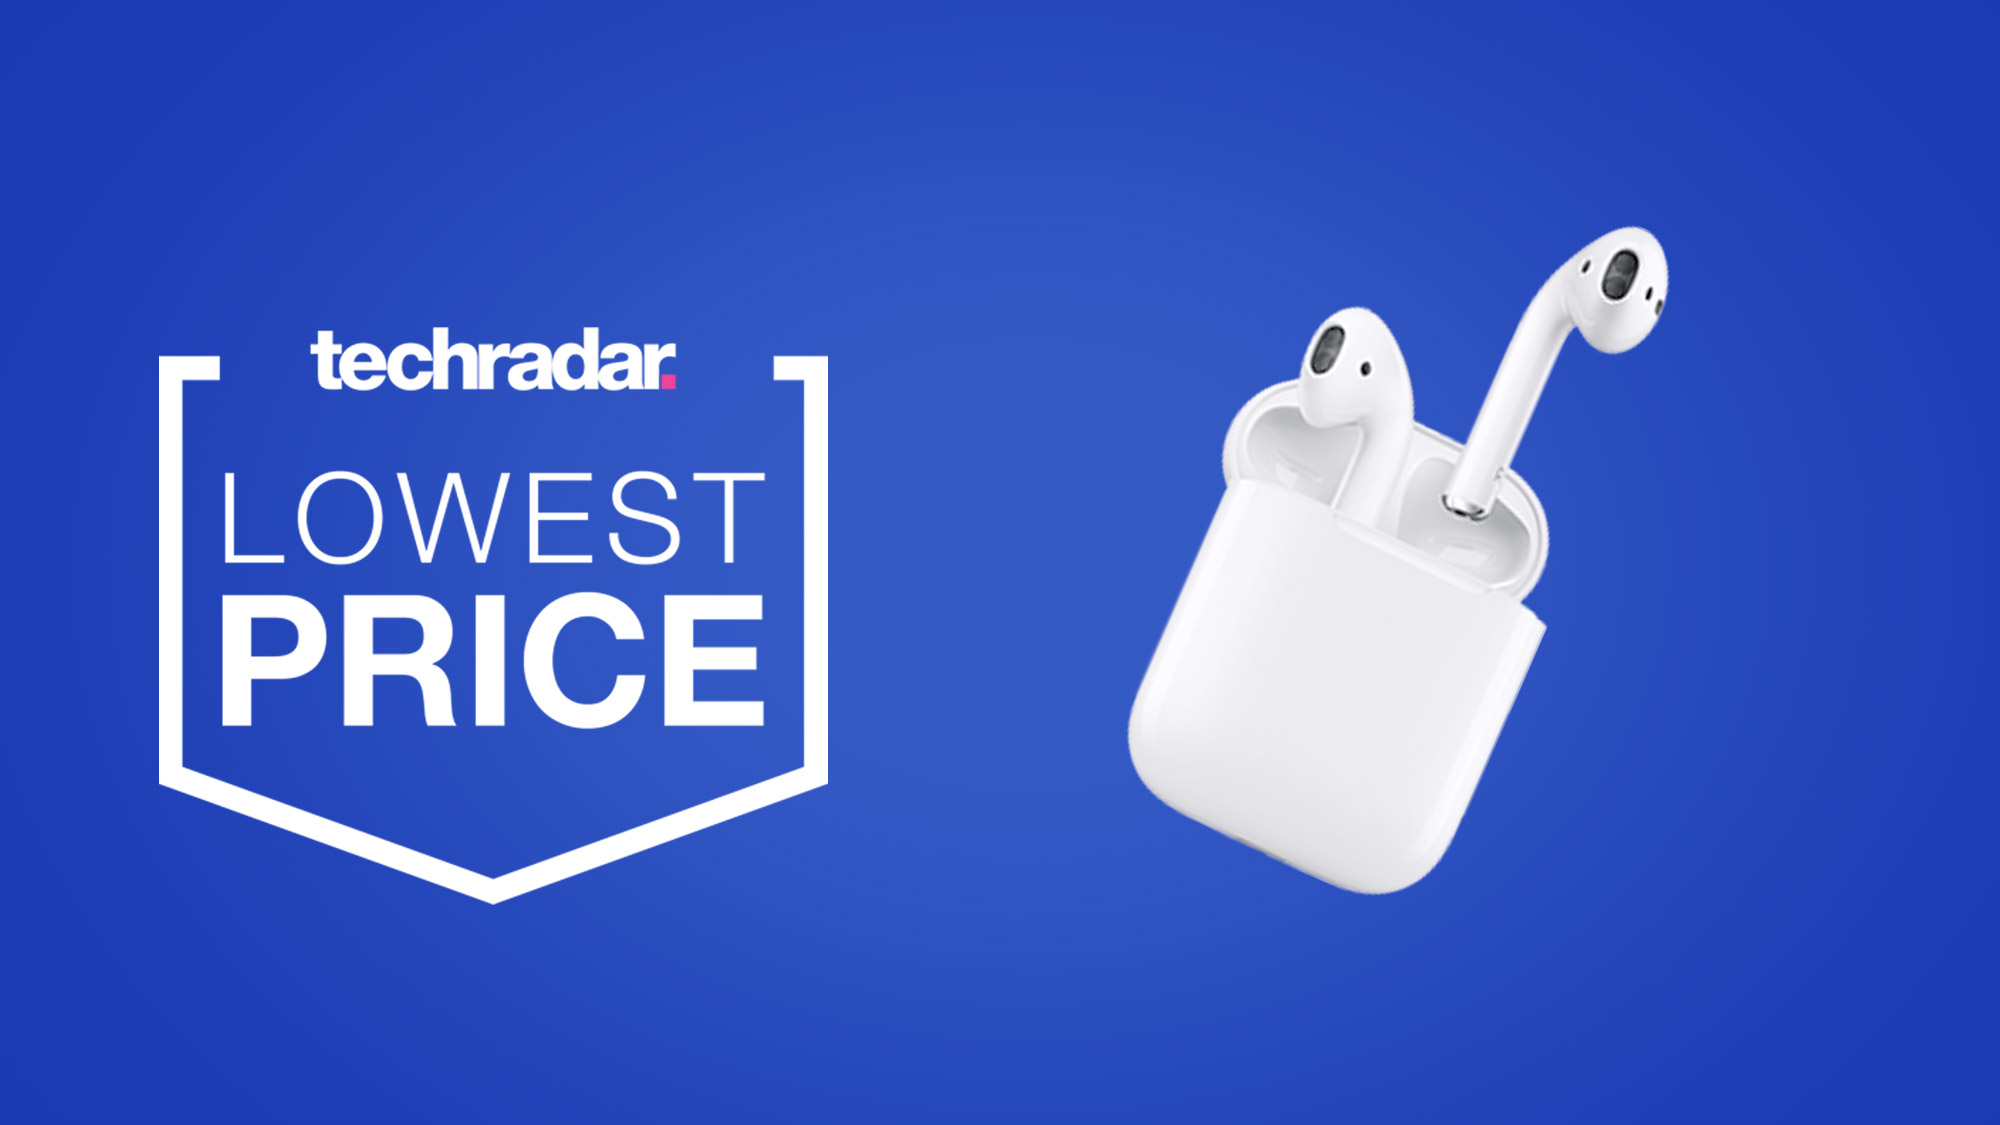 Hurry! The latest model AirPods are on sale for $129.98 - the lowest .